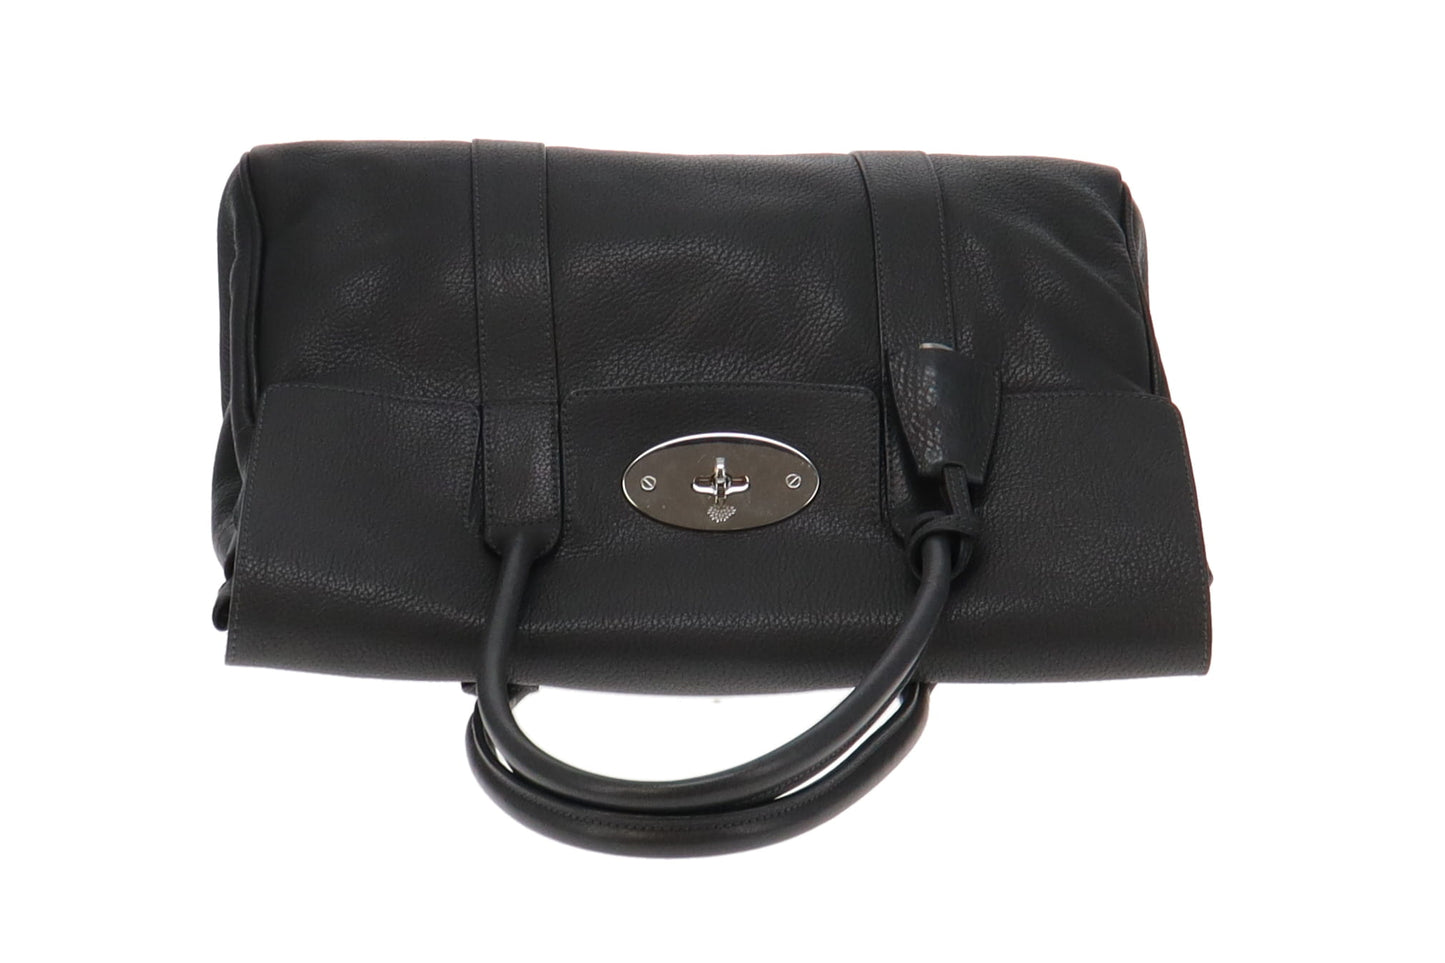 Mulberry Dark Grey Pebbled Leather Heritage Bayswater With Silver Hardware